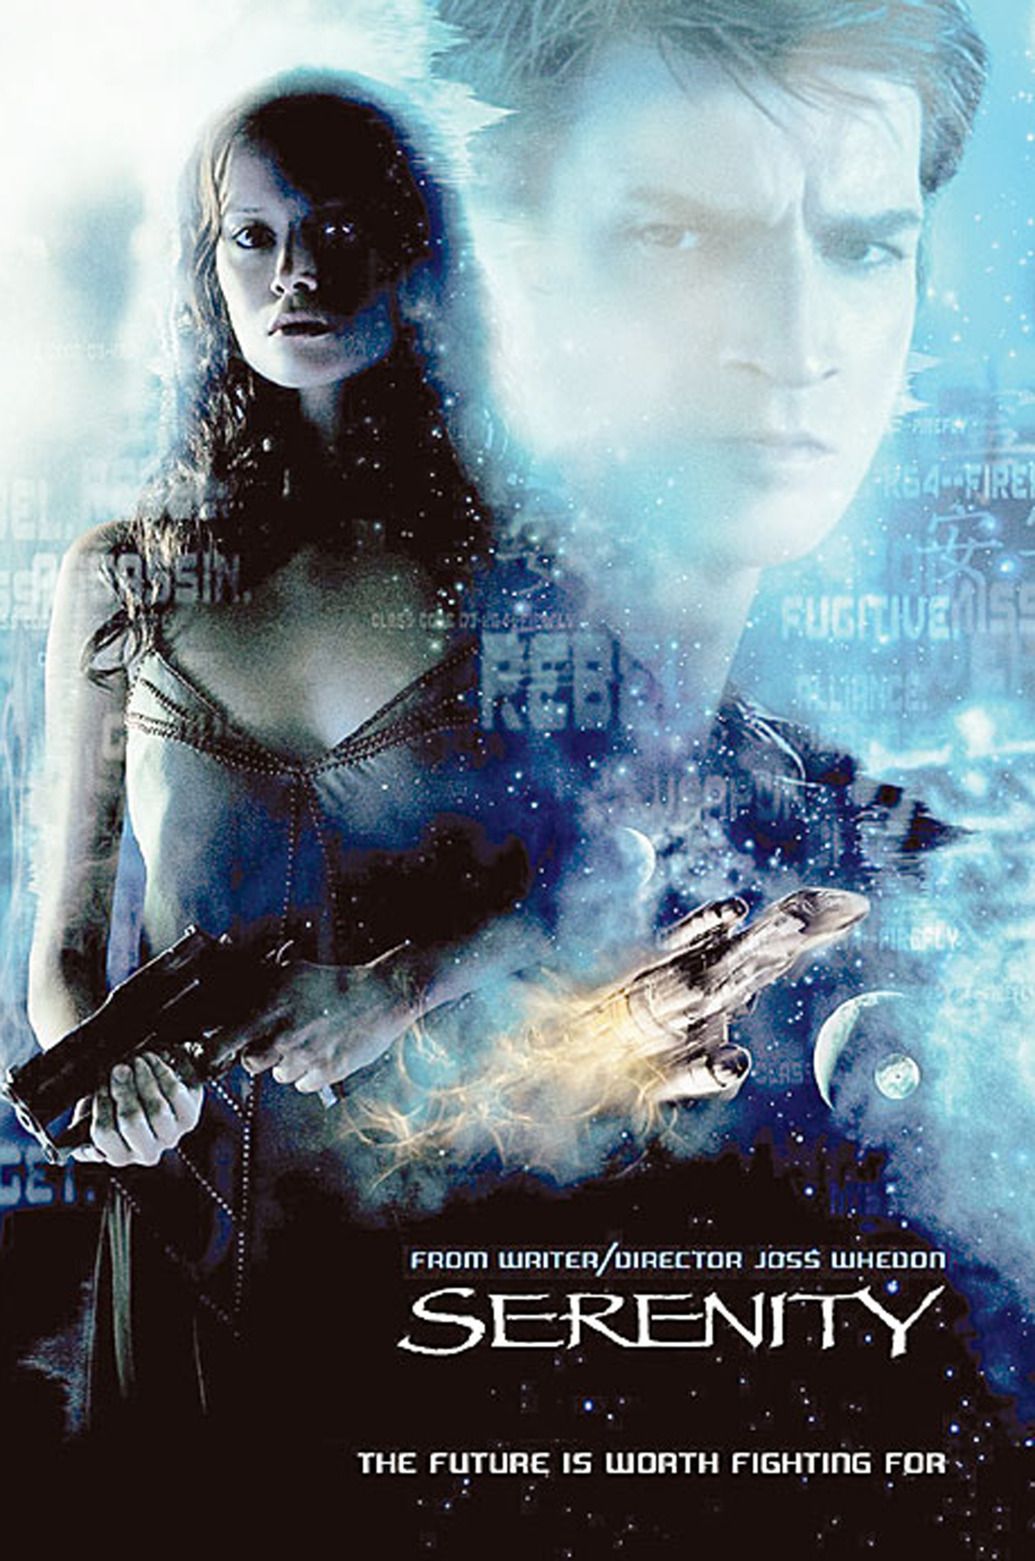 Serenity Poster 8: Full Size Poster Image